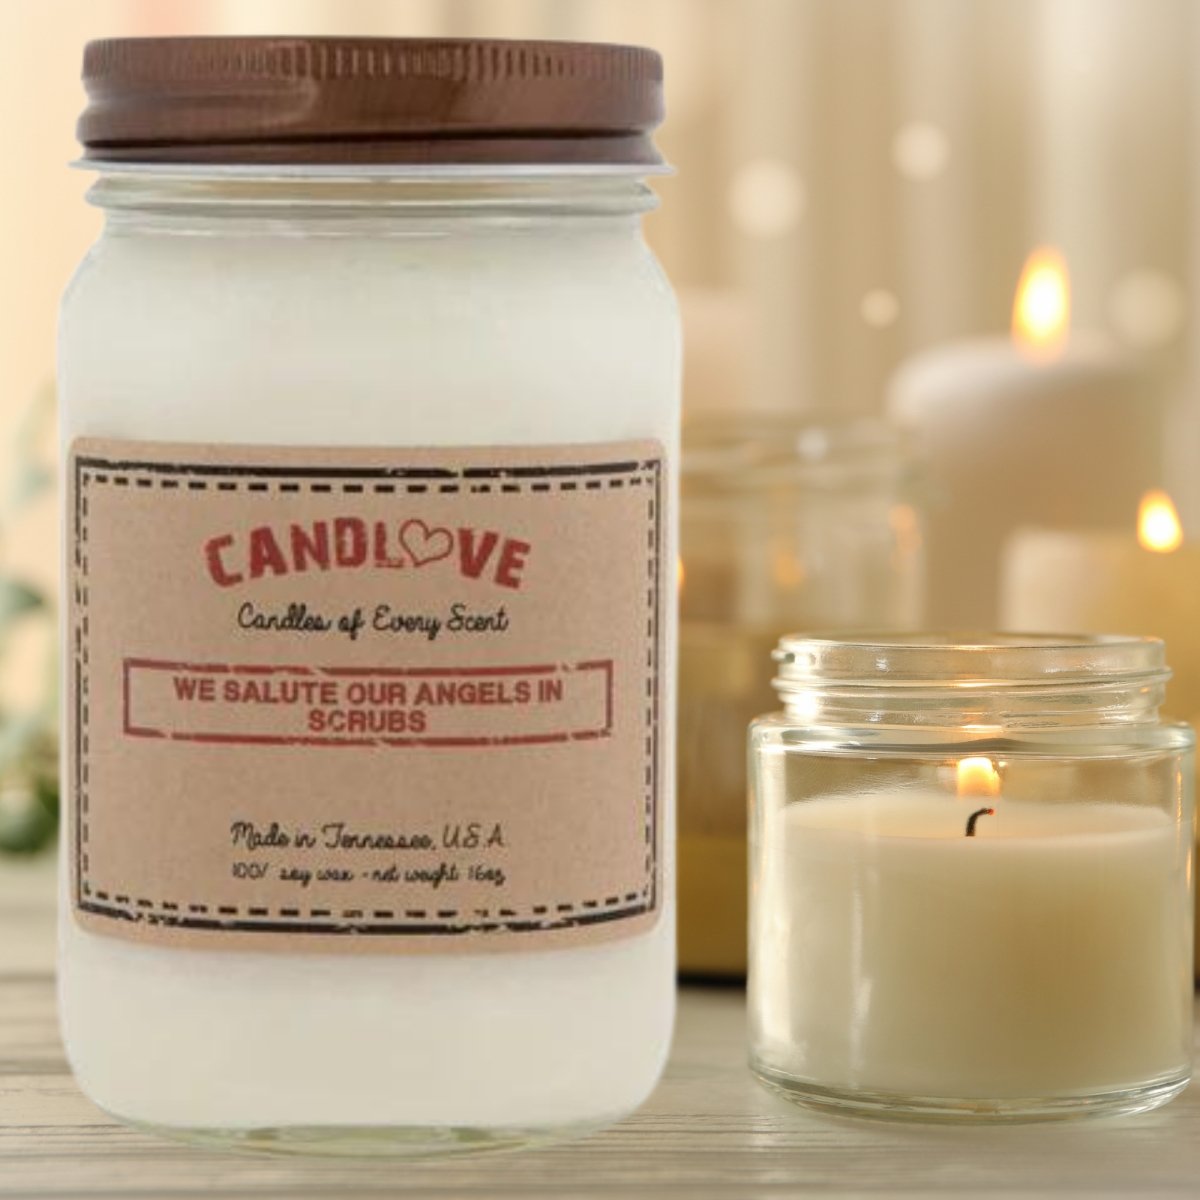 Picture of PPI SUPPLIES Vanilla-A-C Candlove Vanilla We Salute Our Angels Scented Candle - Non-Toxic 100% Soy Candle - Handmade & Hand Poured Long Burning Candle - Highly Scented All Natural Clean Burning Candle (16 OZ Mason Jar) Made in The USA